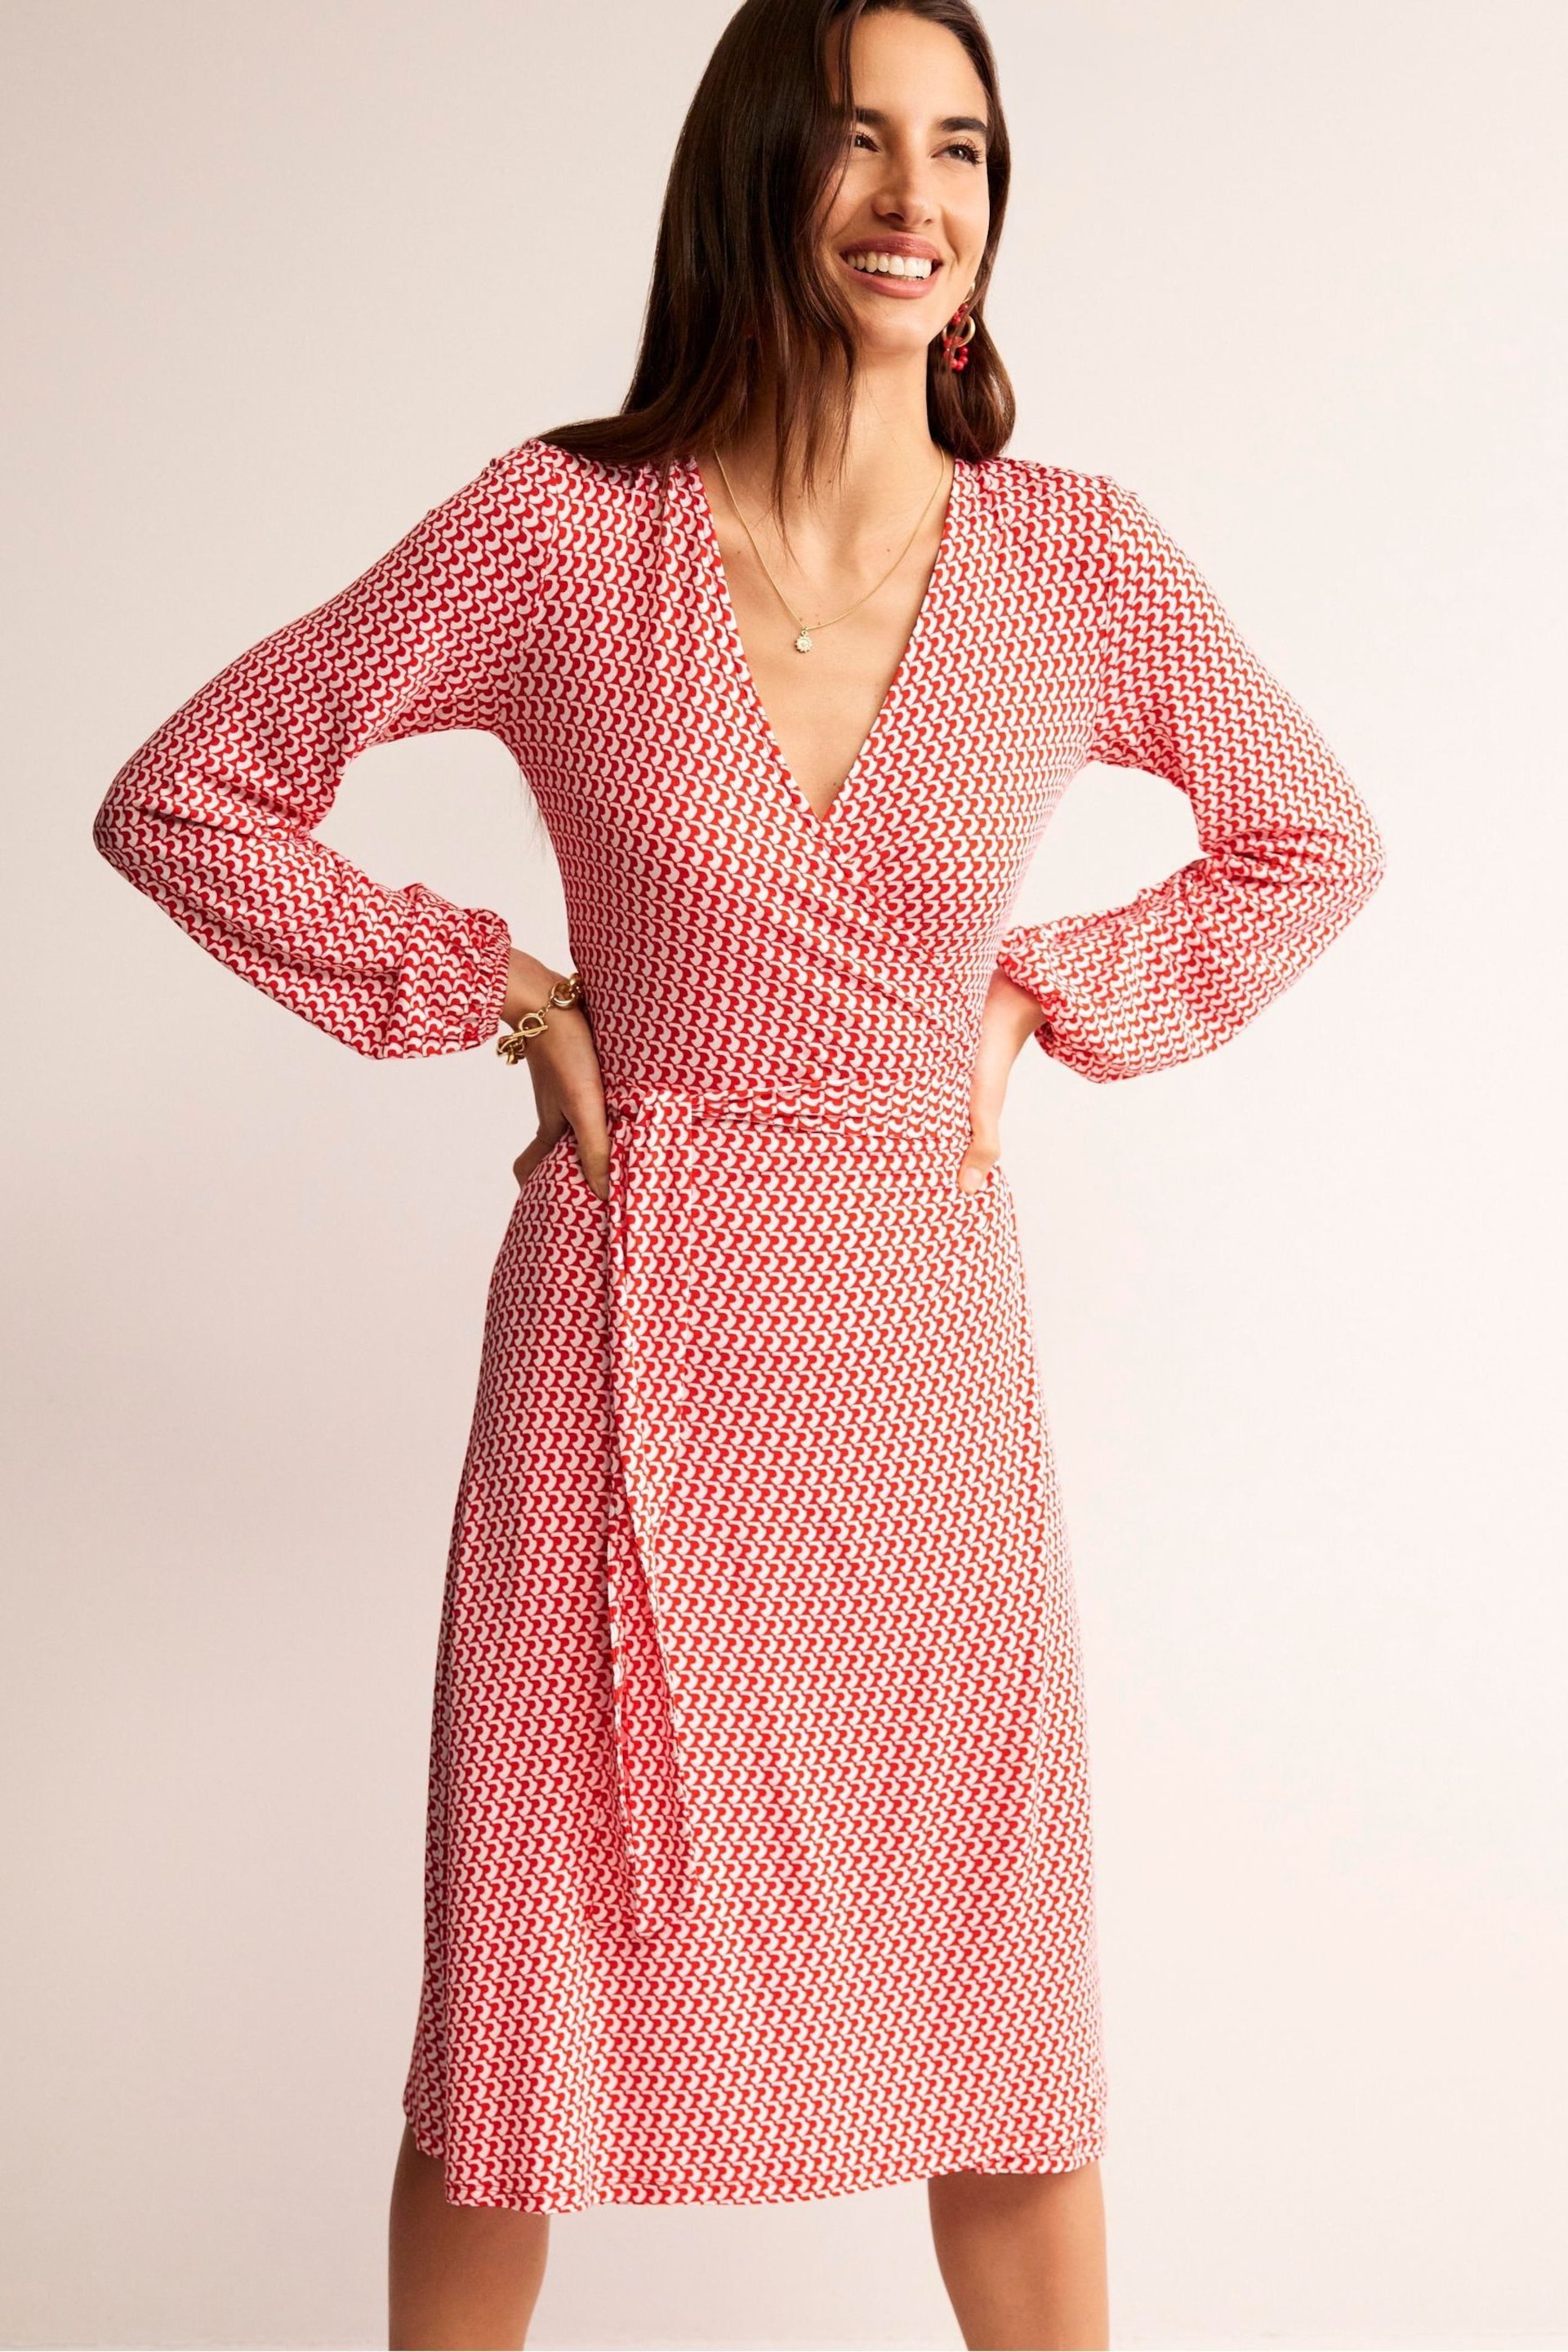 Boden Red Joanna Jersey Midi Wrap Dress - Image 3 of 6